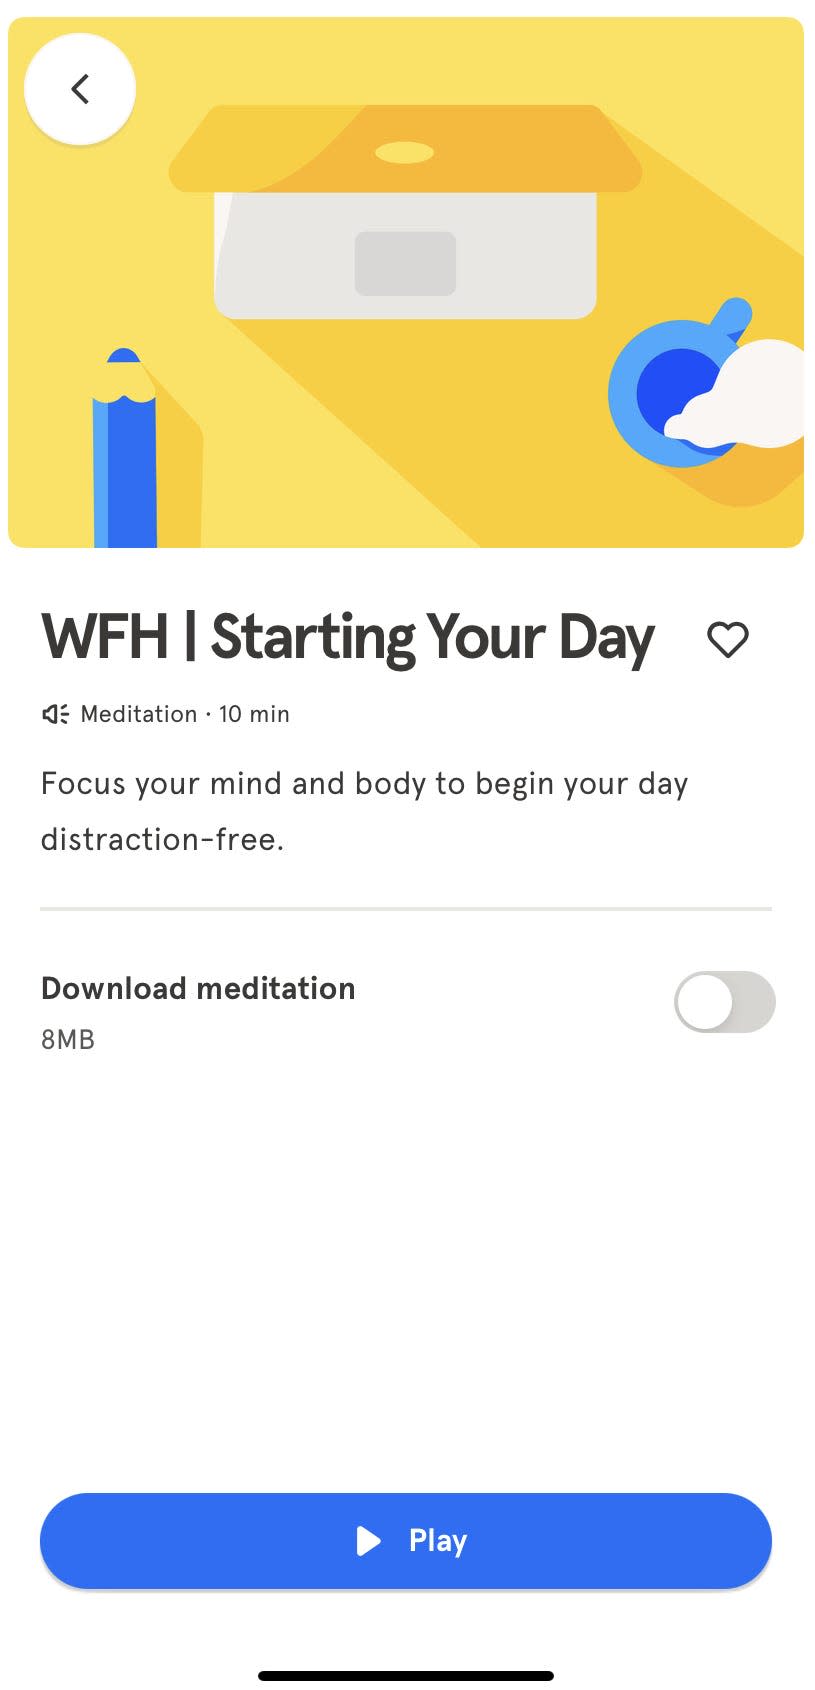 a meditation called "WFH | Starting Your Day" in a screenshot of the meditation app Headspace